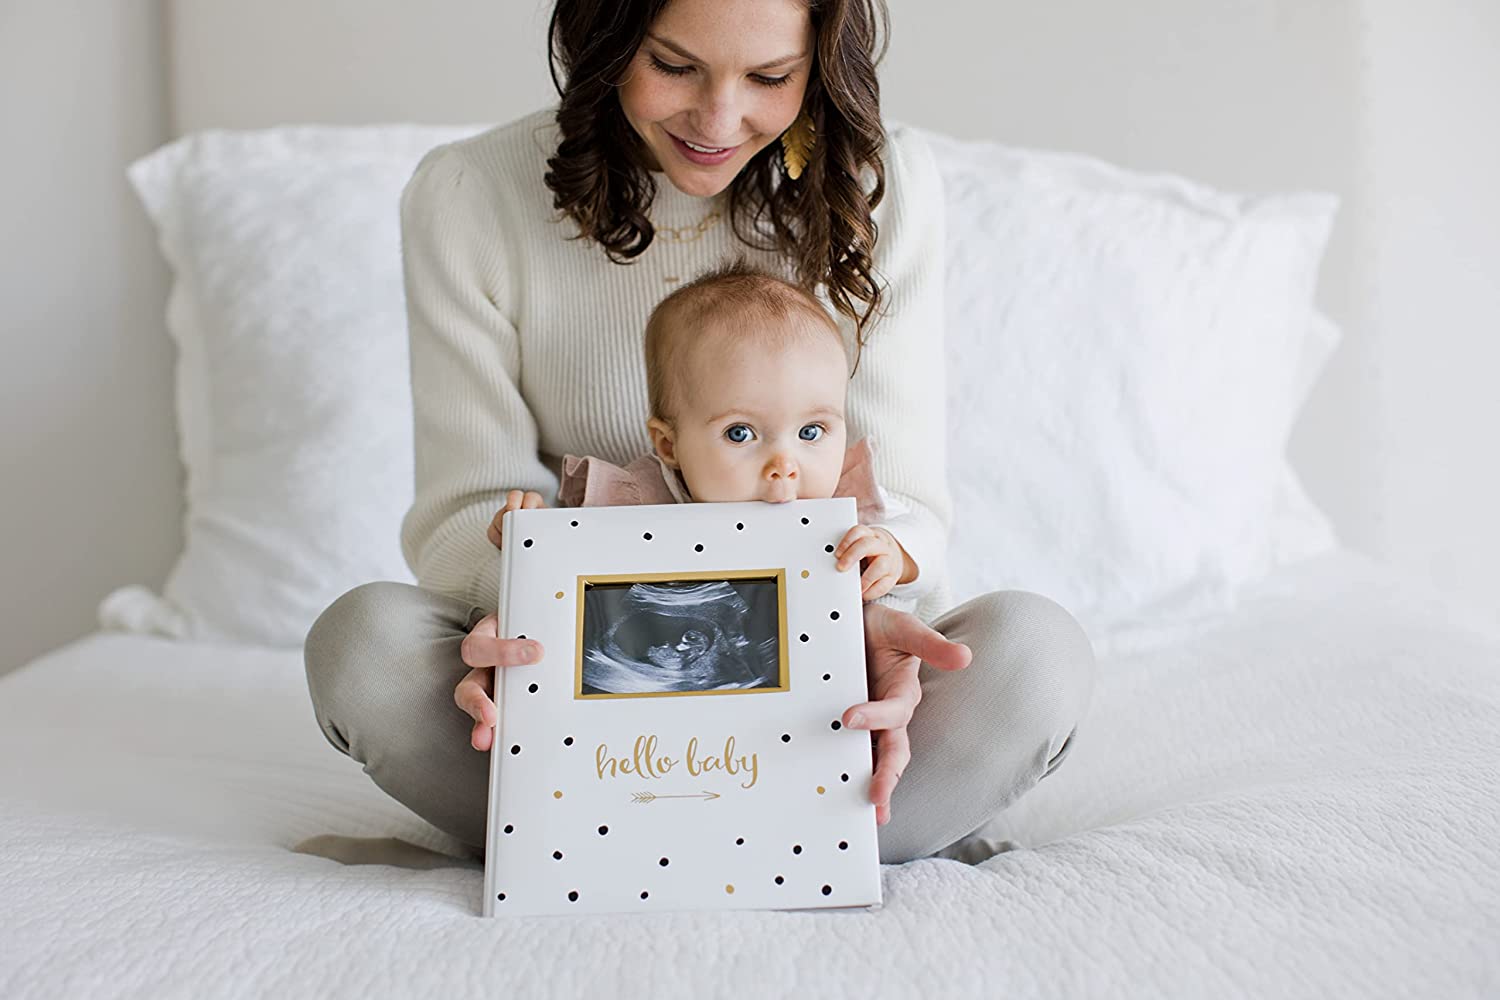 Simple & Practical Gifts that New Moms ACTUALLY need.